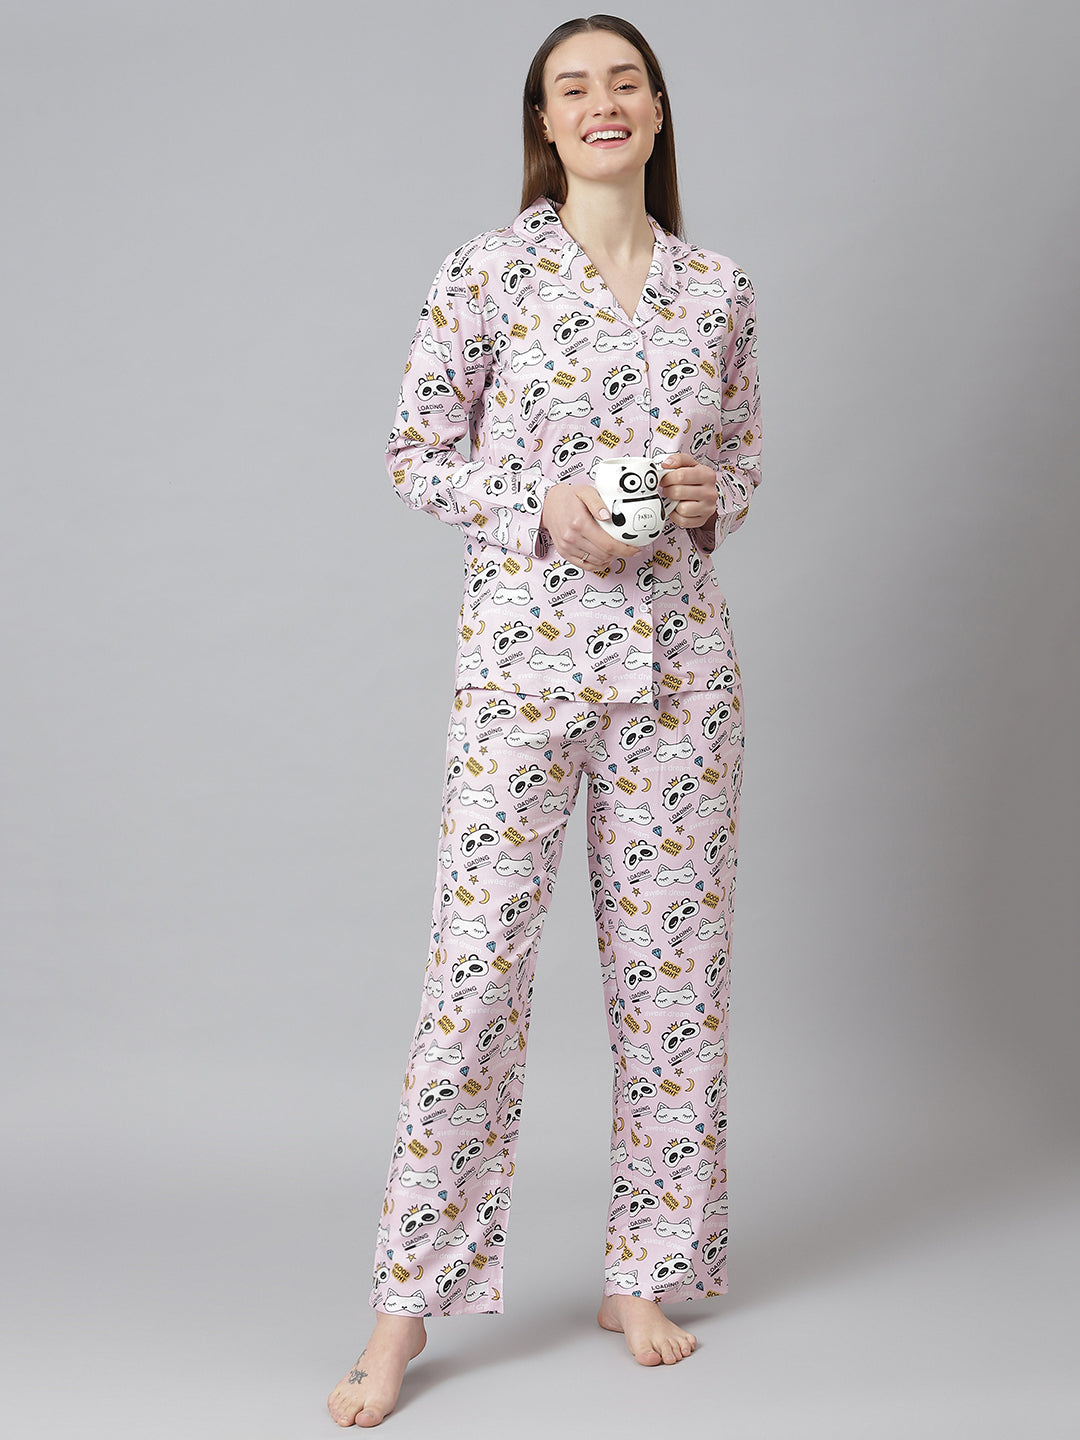 Cation Pink Printed Night Suit